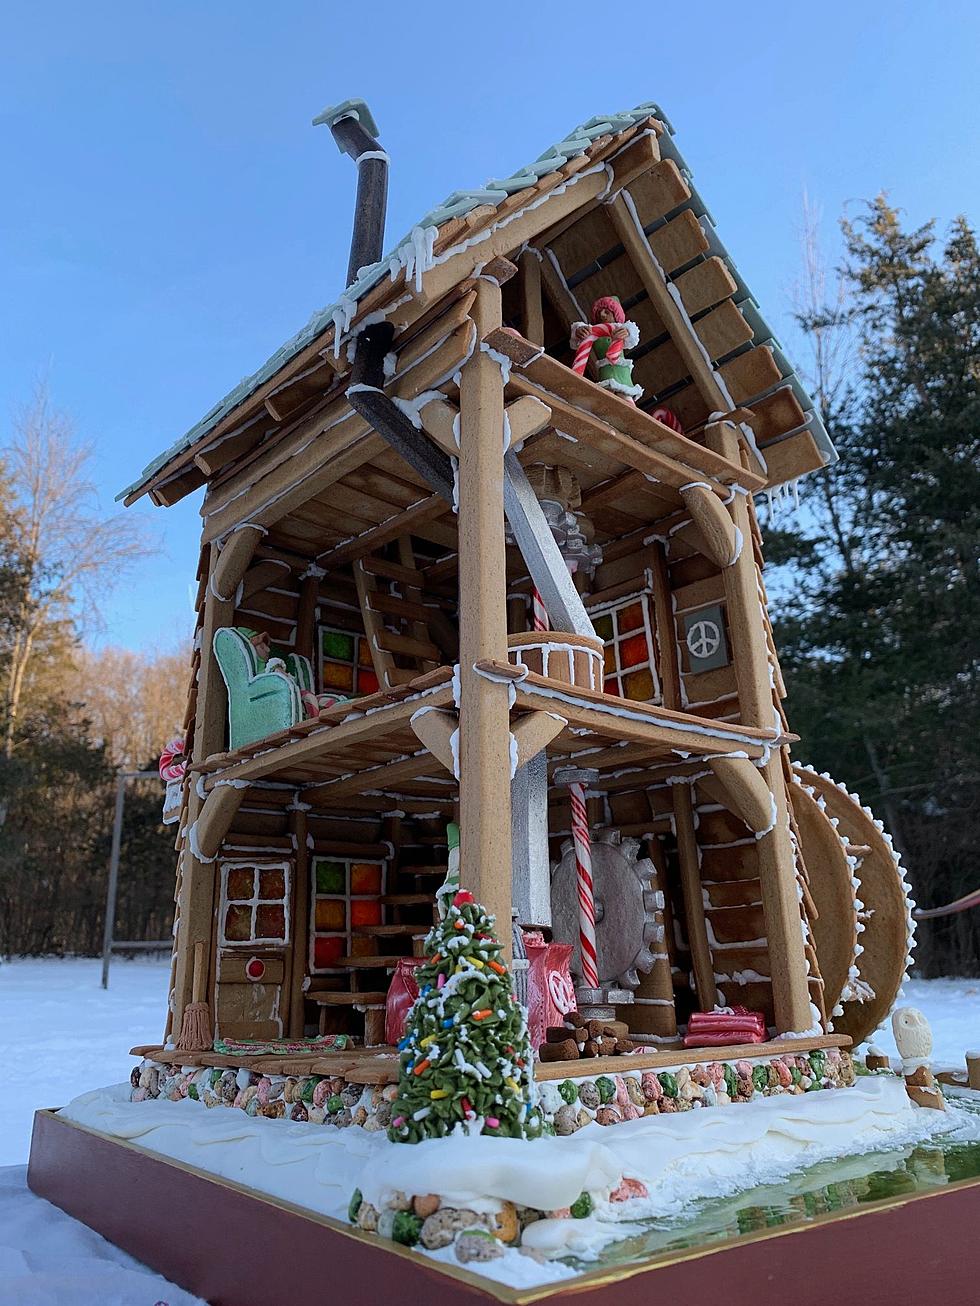 New Paltz Man Shows Off His Gingerbread House on TV&#8217;s Food Network